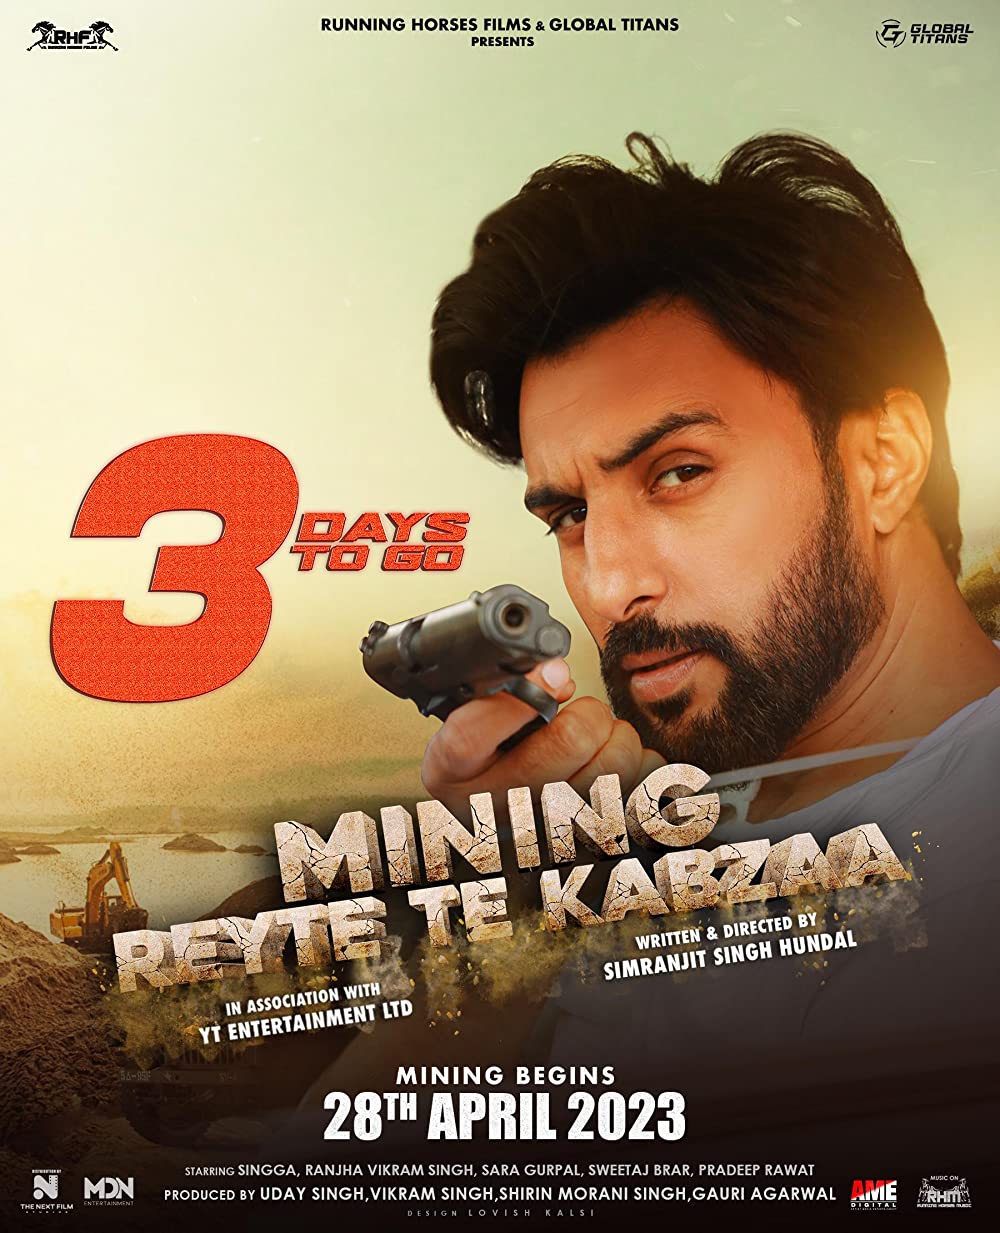 Mining - Reyte te Kabzaa Box Office Collection - Here is the Mining - Reyte te Kabzaa Punjabi movie cost, profits & Box office verdict Hit or Flop, wiki, Koimoi, Wikipedia, Mining - Reyte te Kabzaa, latest update Budget, income, Profit, loss on MT WIKI, Bollywood Hungama, box office india.